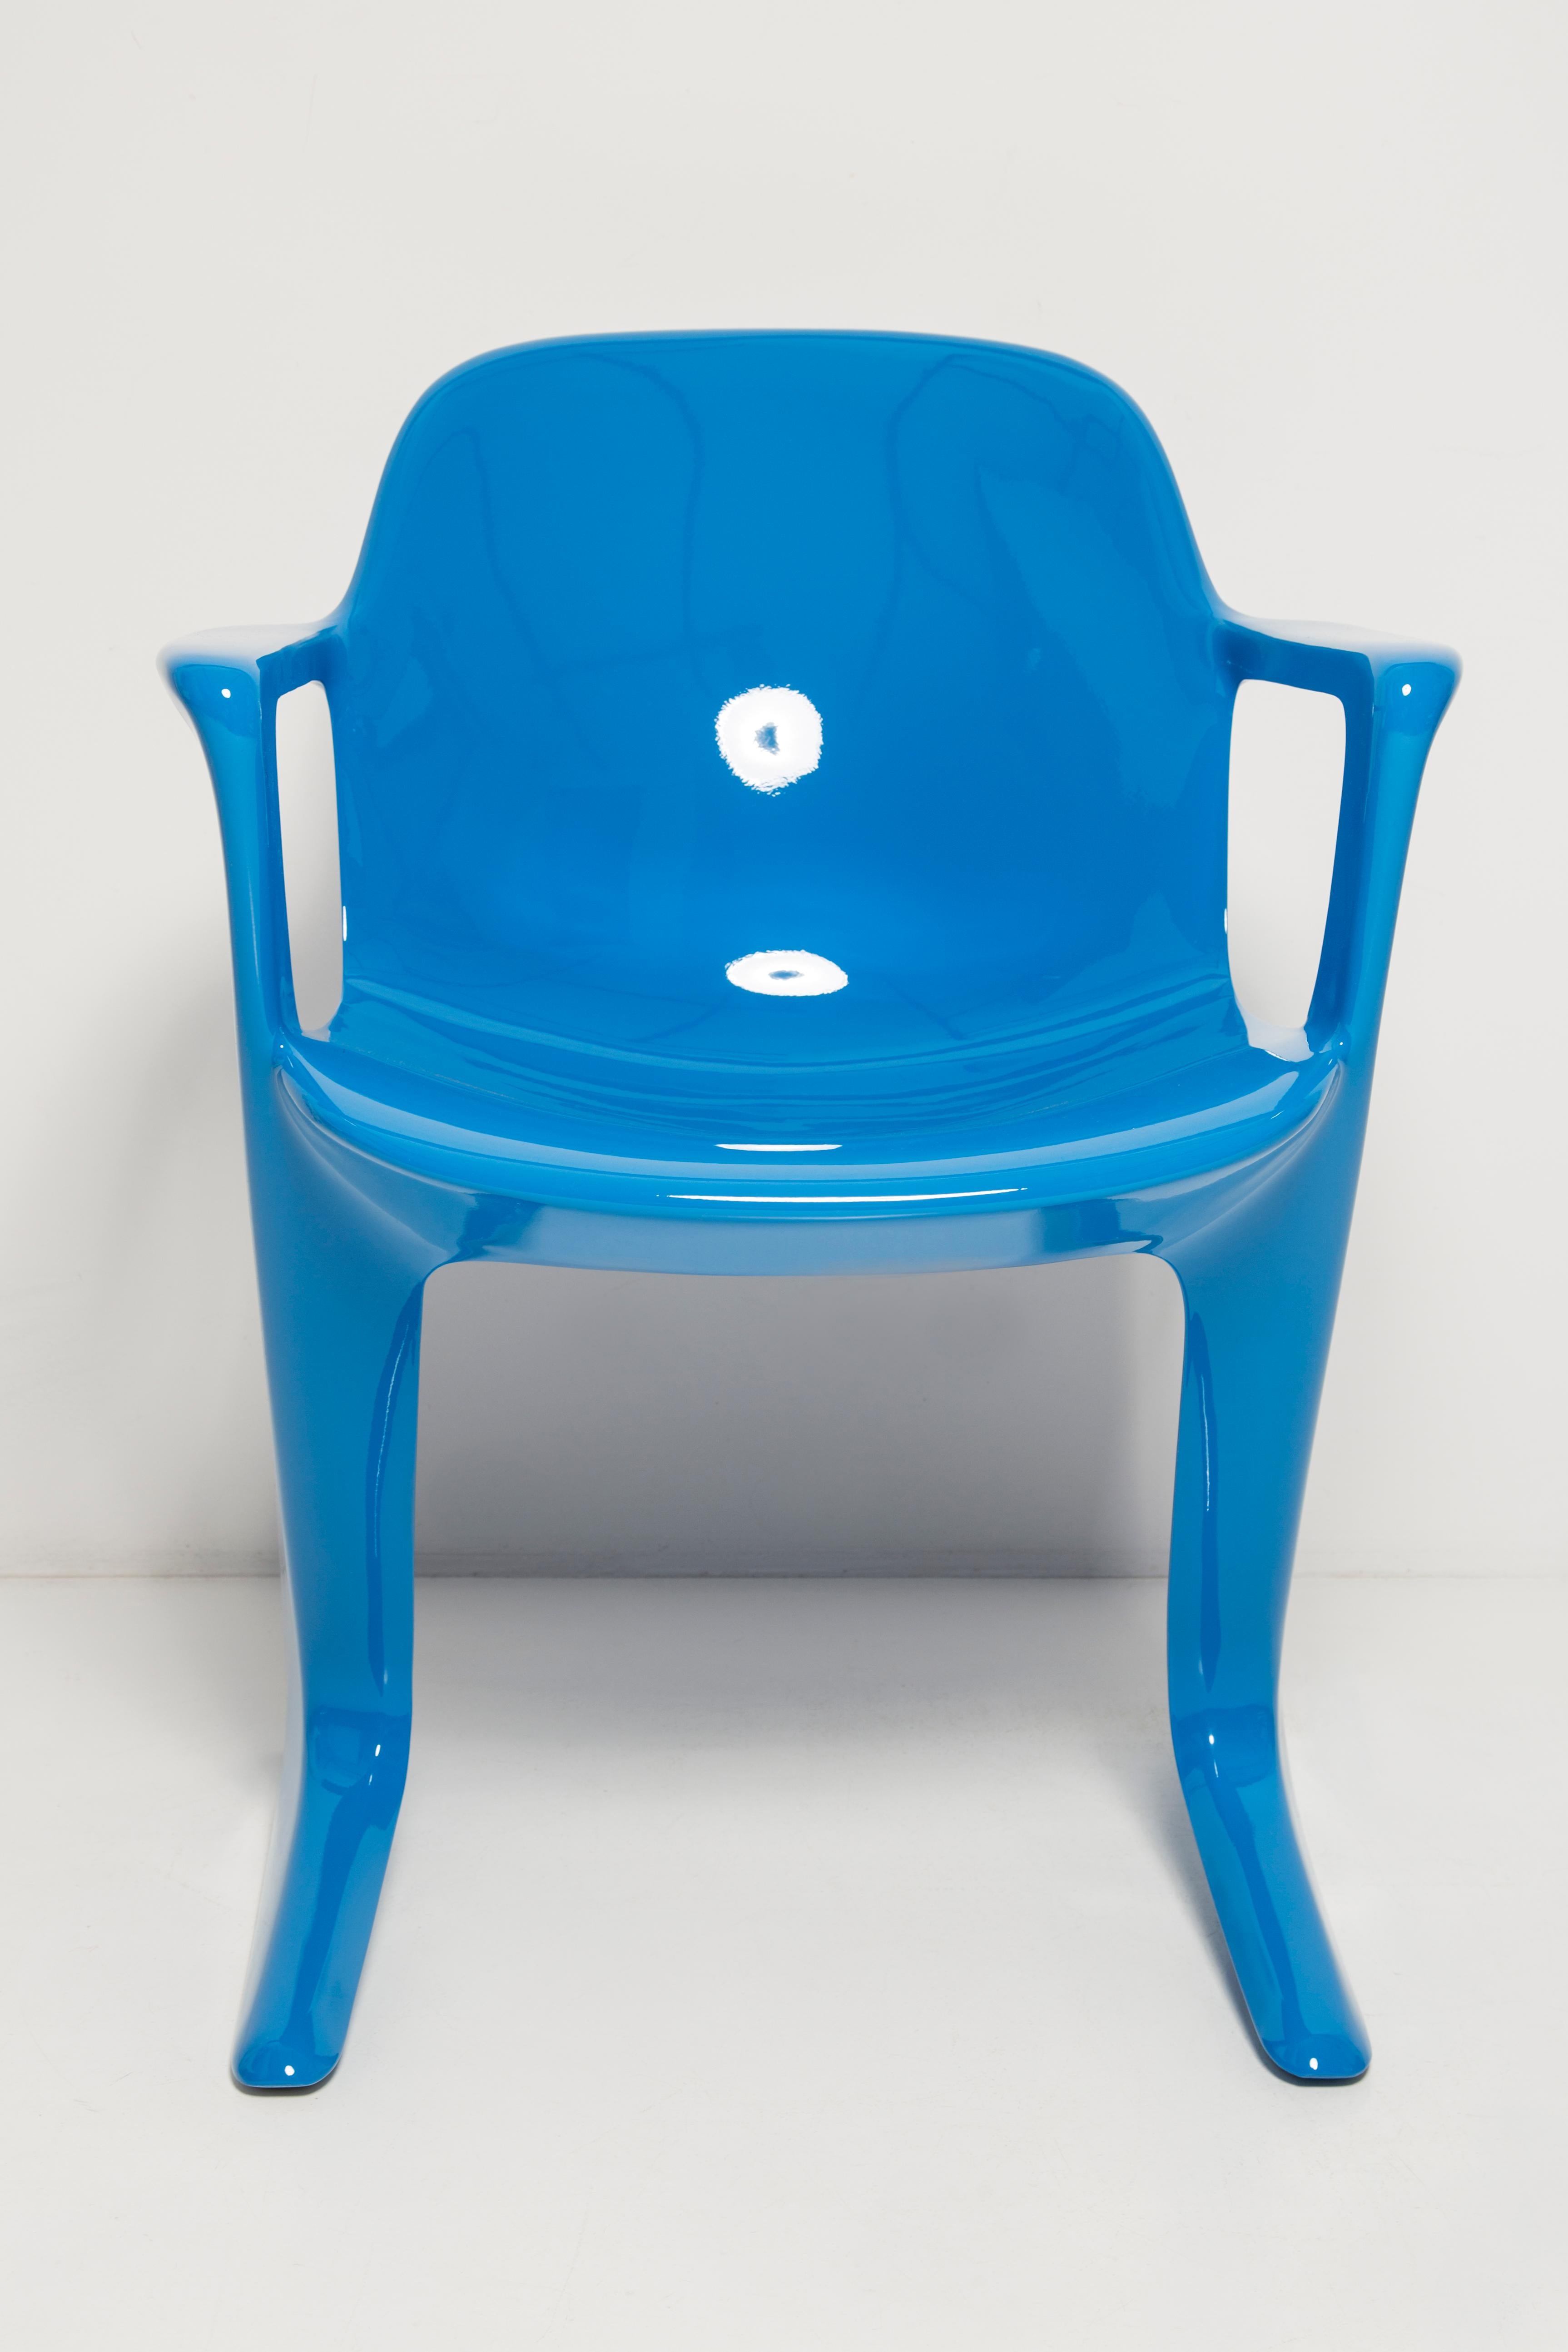 Blue Kangaroo Chair Designed by Ernst Moeckl, Germany, 1968 In Excellent Condition For Sale In 05-080 Hornowek, PL